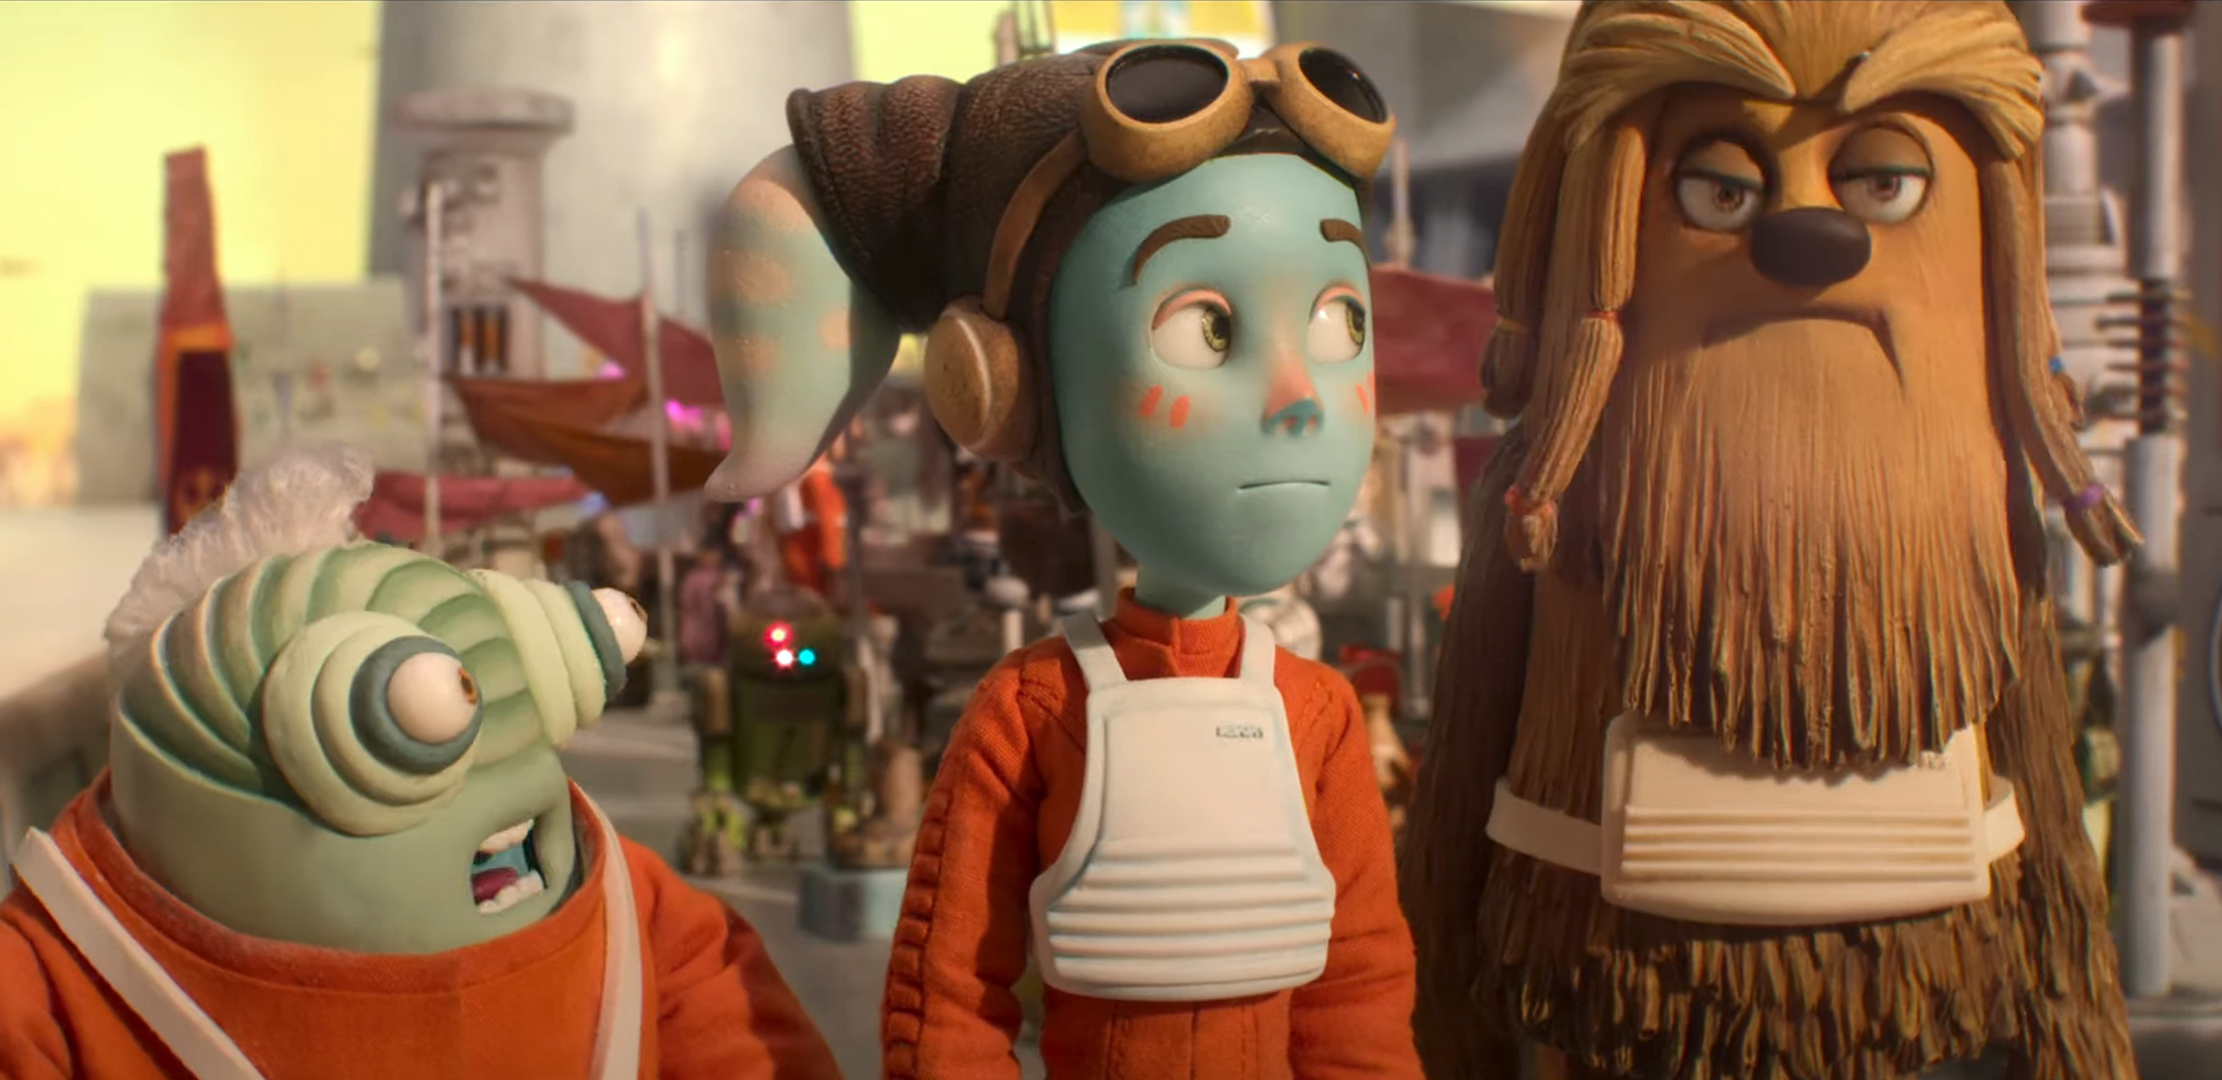 Rebel X-wing pilots (one at right is a wookiee) as shown in the claymation-style animation of Aardham, for Star Wars: Visions